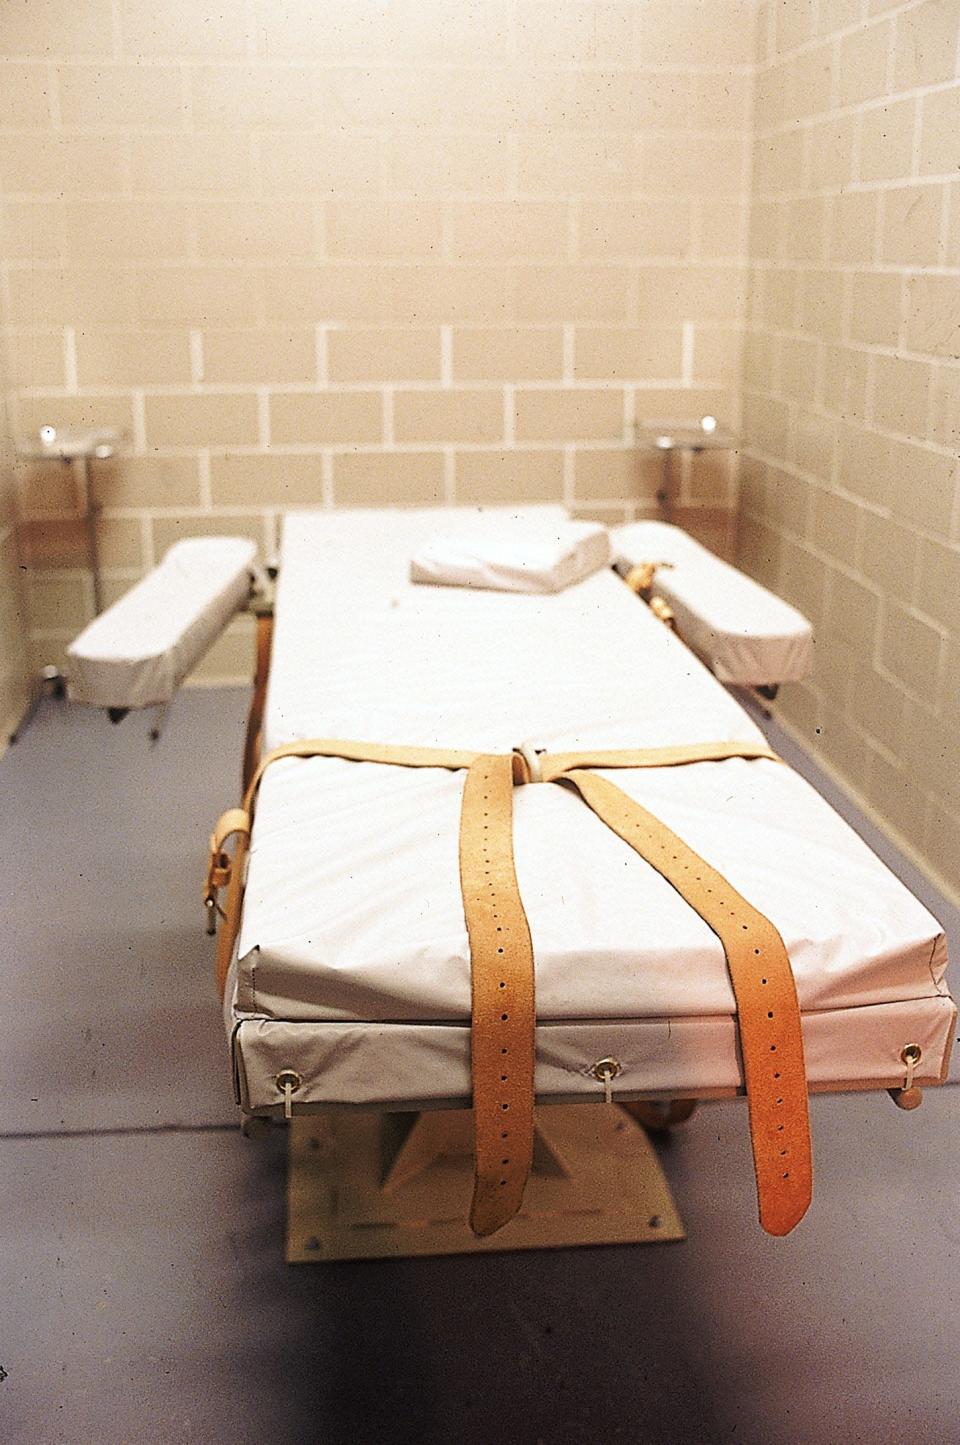 The lethal injection execution chamber at the Arizona State Prison in Florence as seen in 1993.